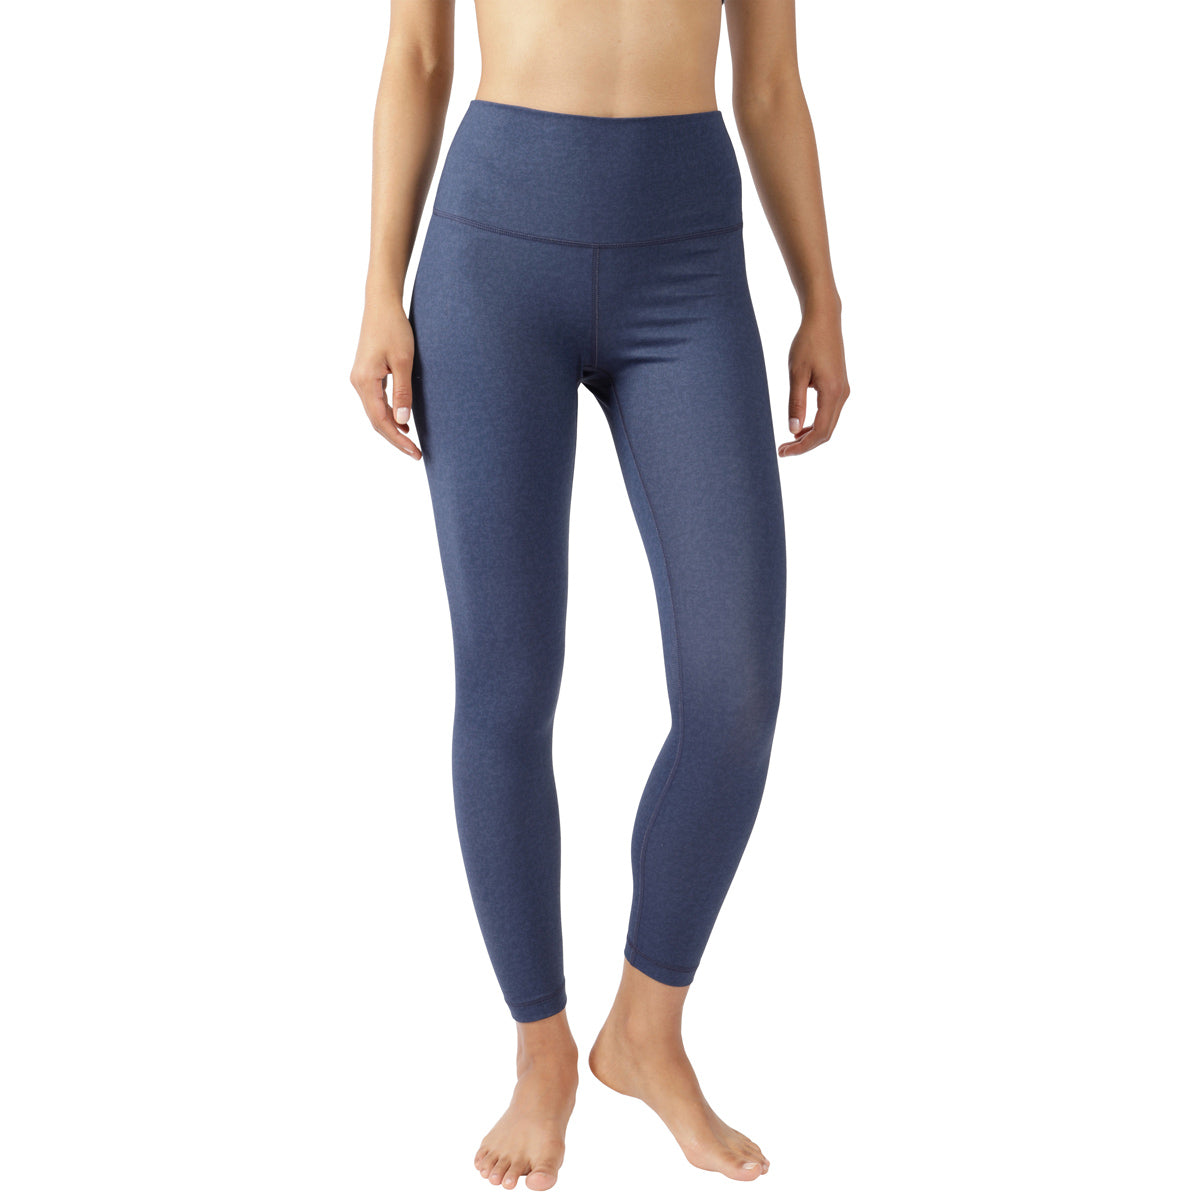 90 Degree By Reflex Activewear Athletic Leggings for Women